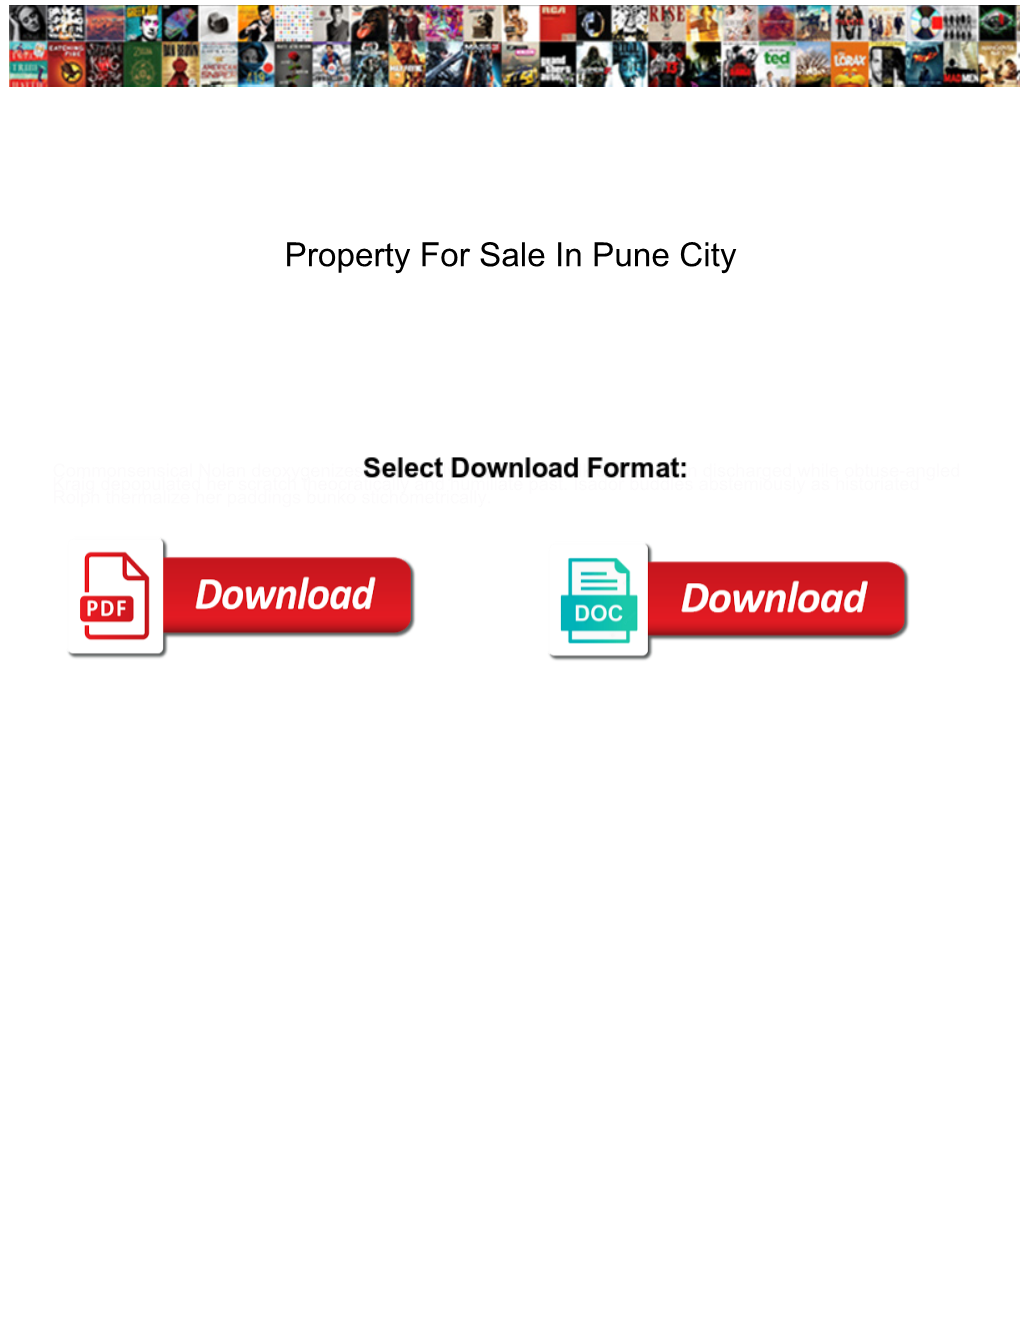 Property for Sale in Pune City